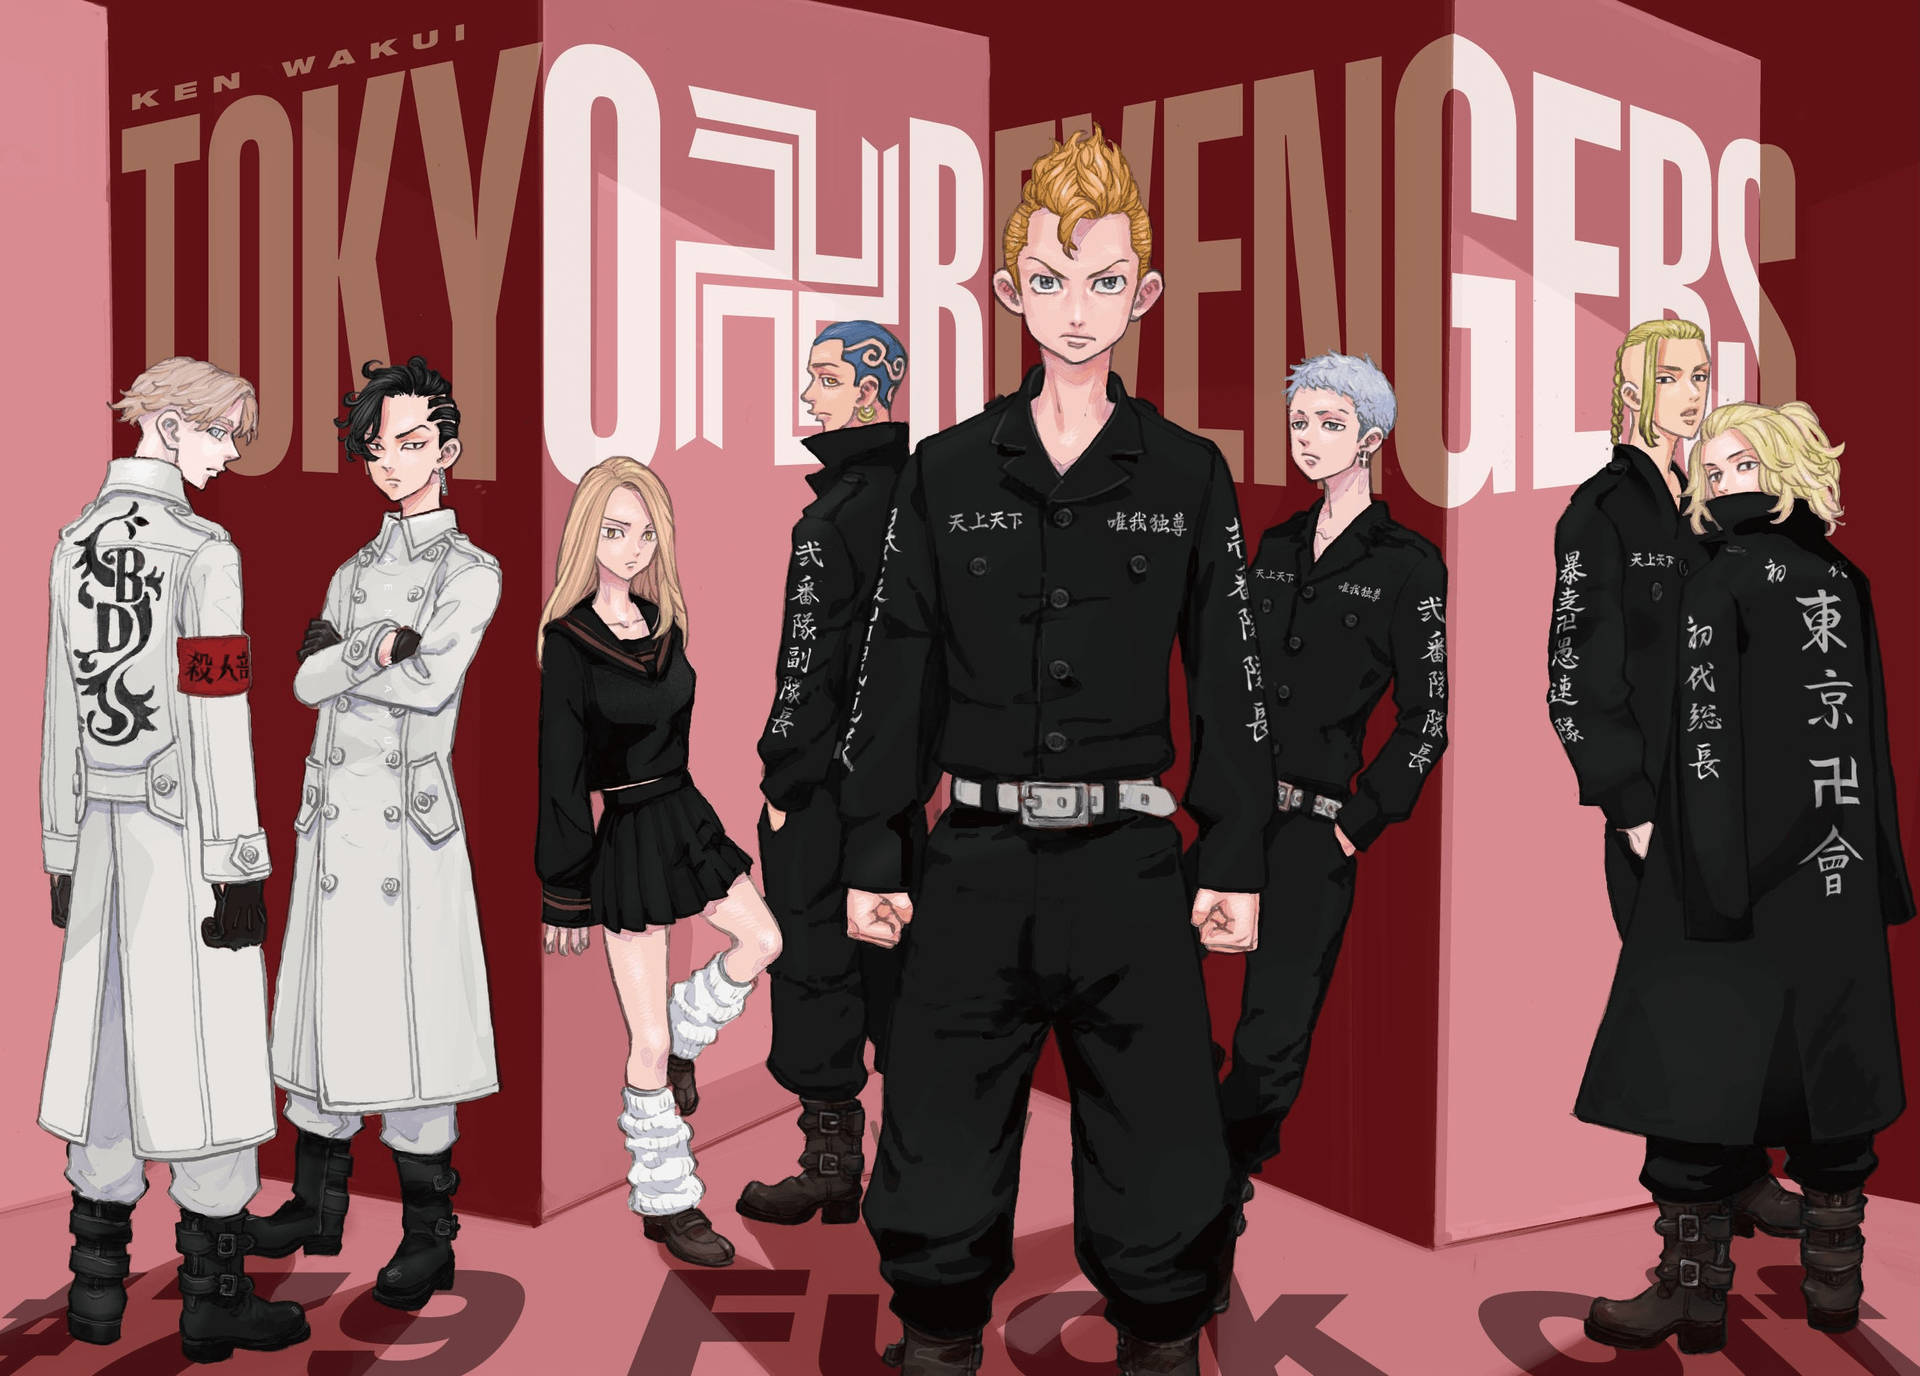 Get Ready For A Wild Ride When The Tokyo Revengers Hit The Road Background